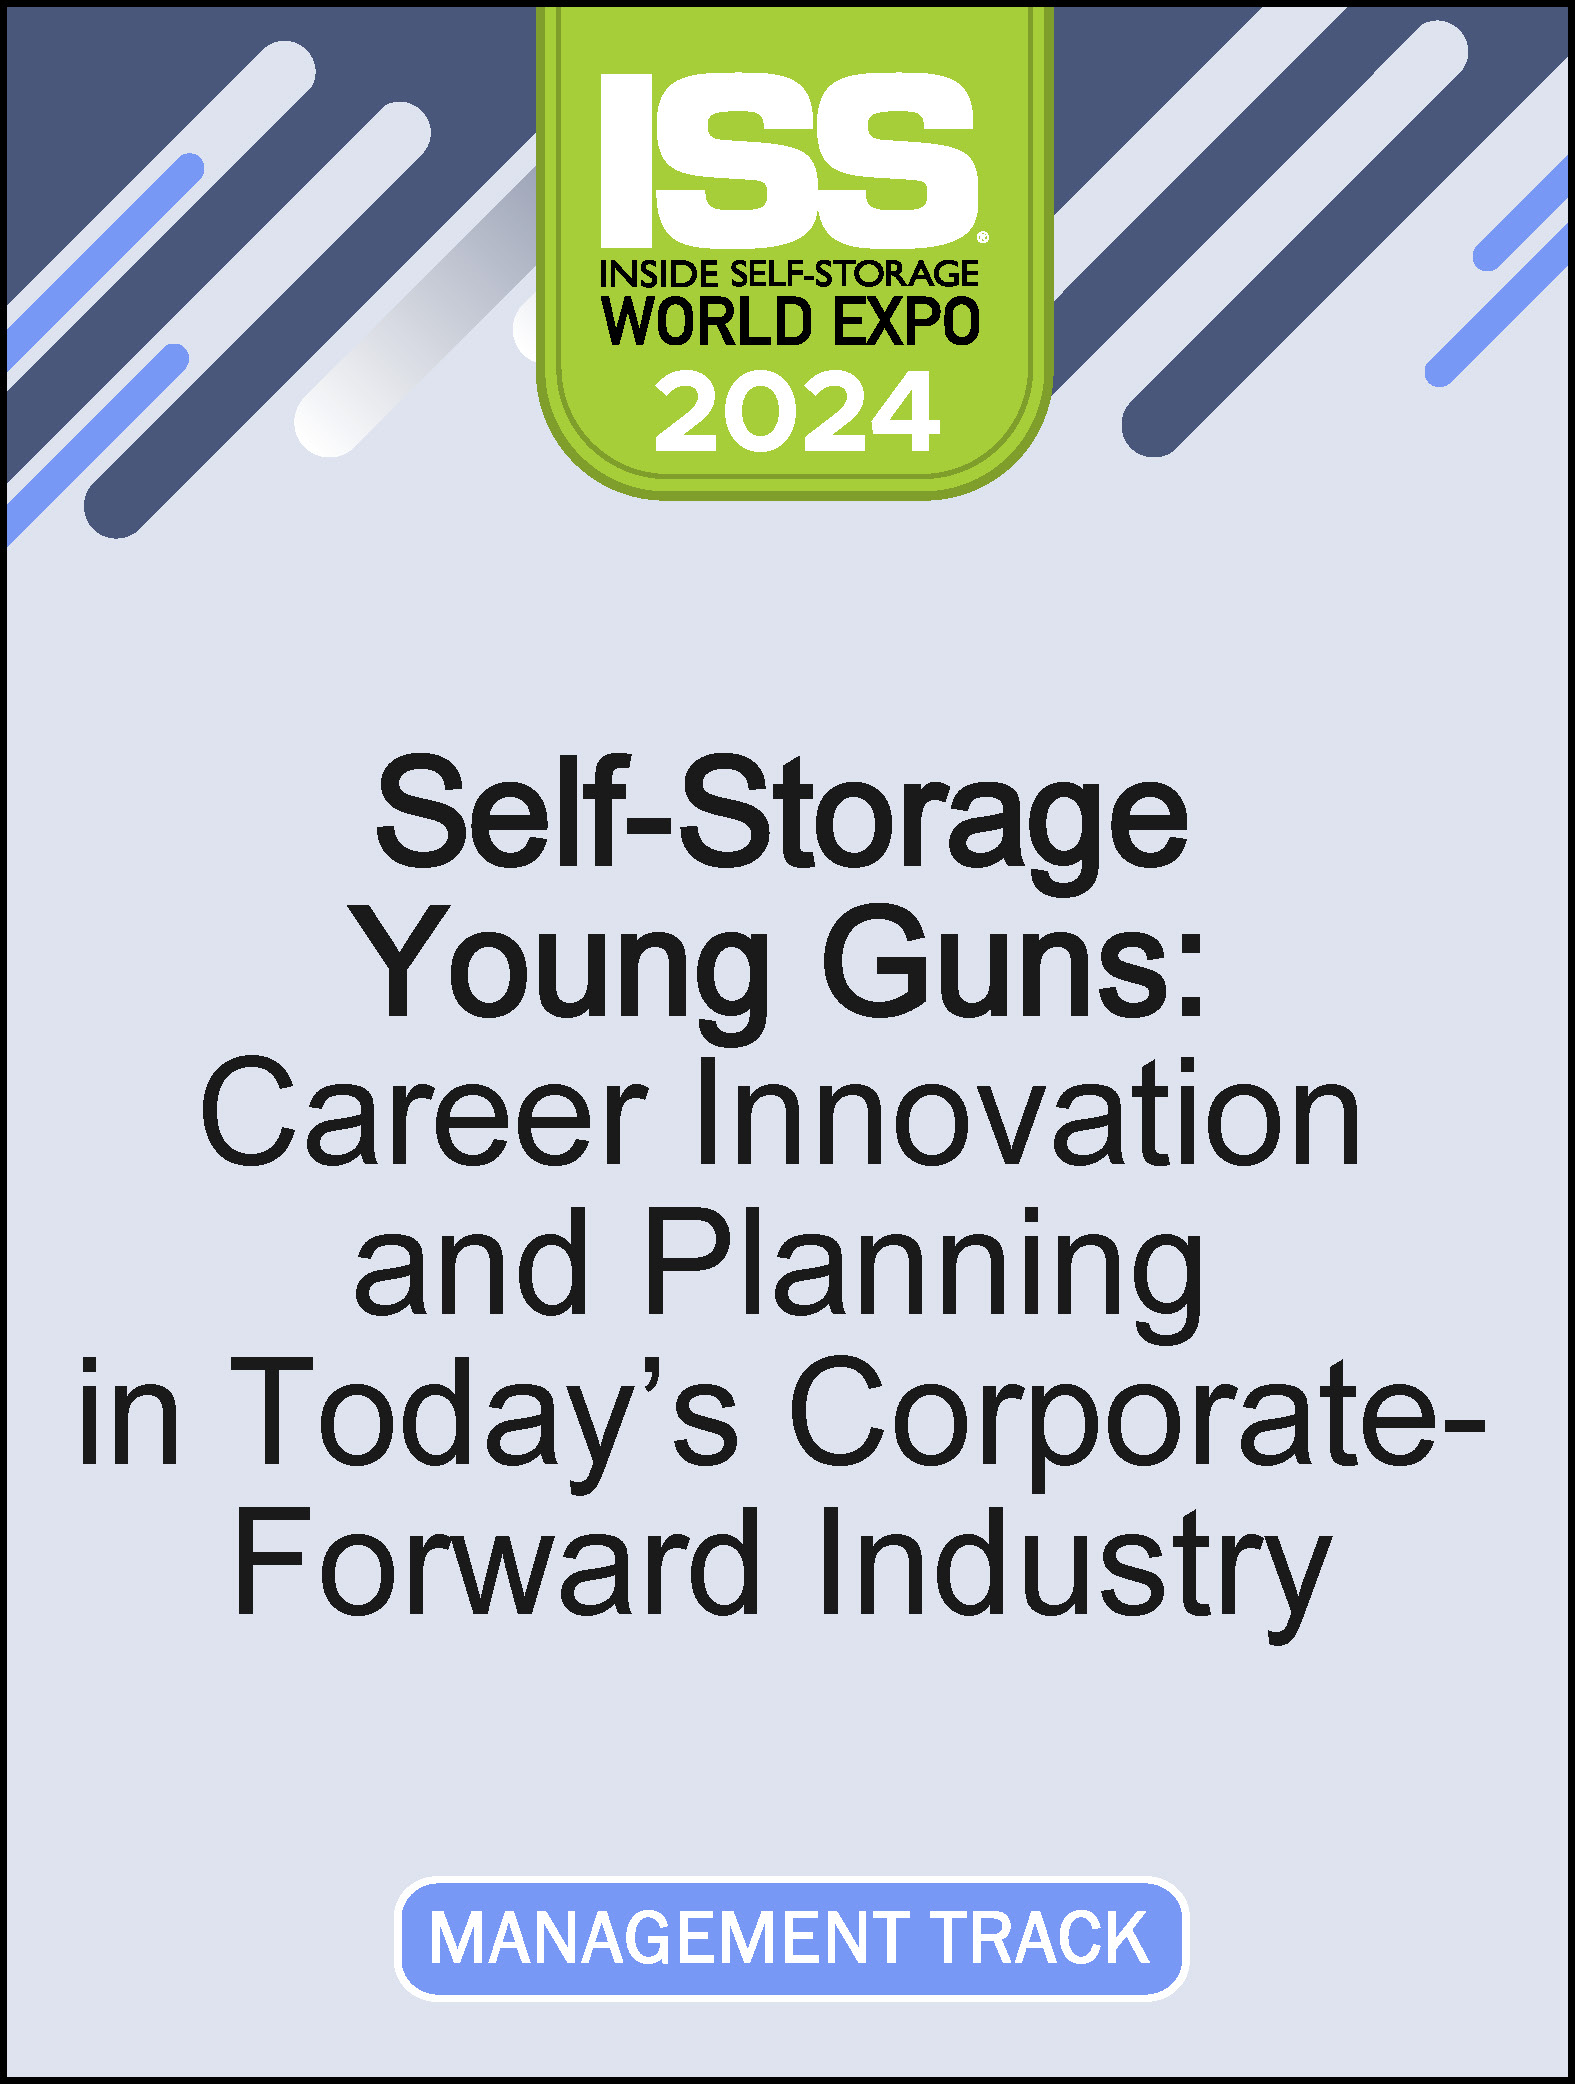 Video Pre-Order PDF - Self-Storage Young Guns: Career Innovation and Planning in Today’s Corporate-Forward Industry